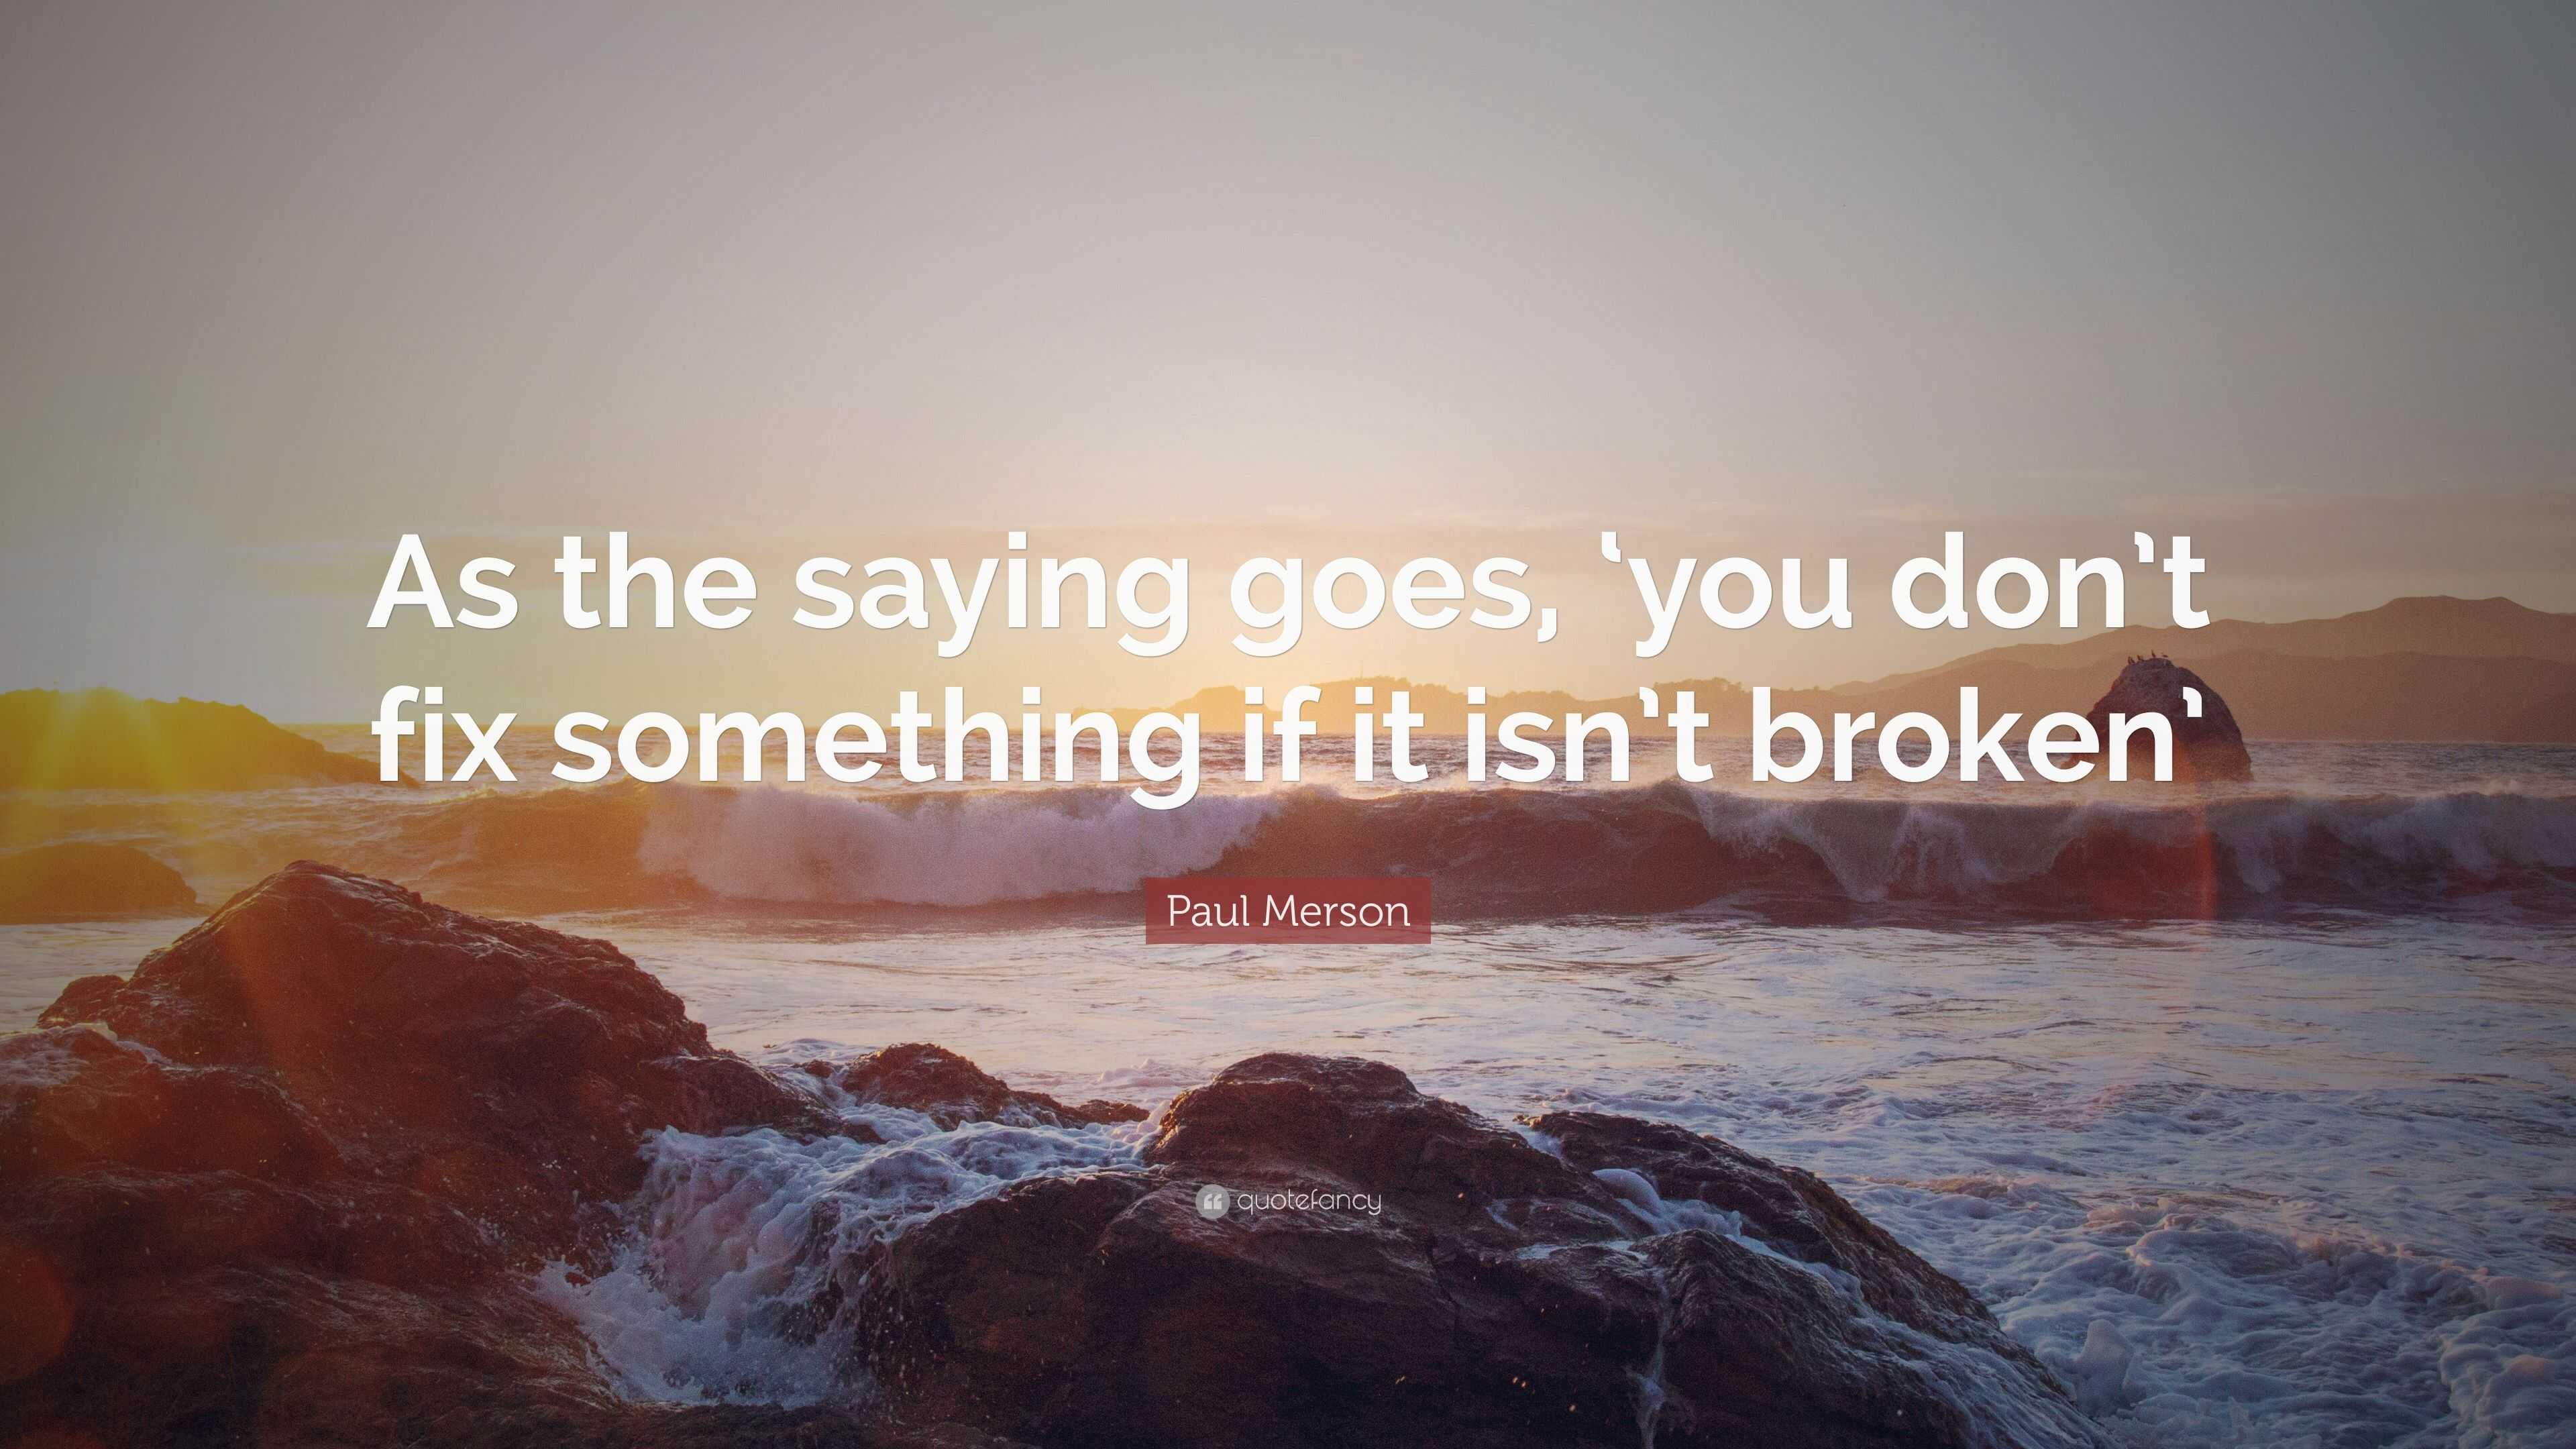 Paul Merson Quote: “As the saying goes, 'you don't fix something if it isn't